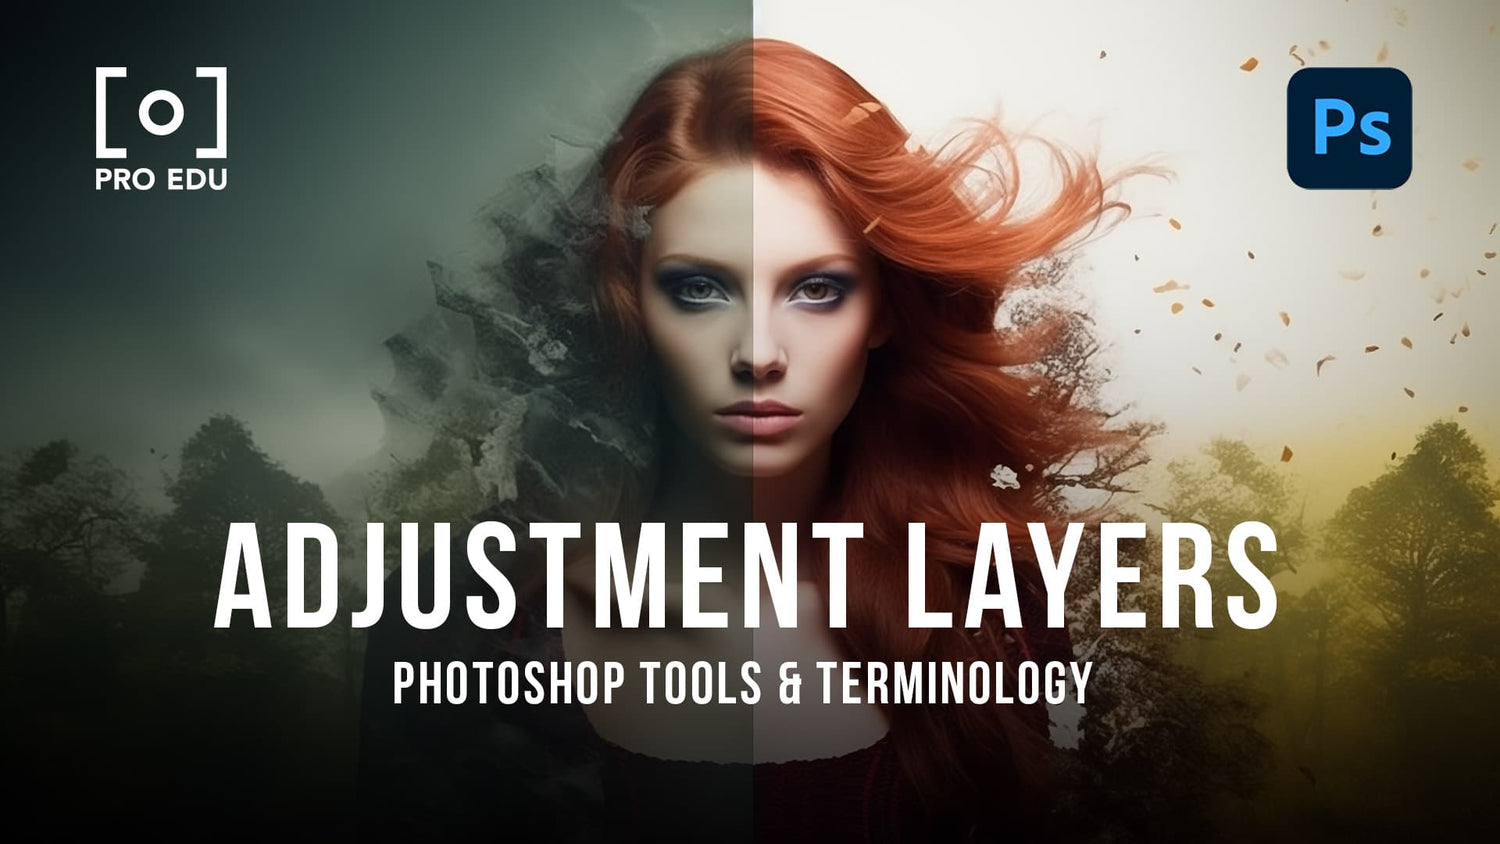 Example of an Adjustment Layer in use in Photoshop, demonstrating how it enhances image editing.